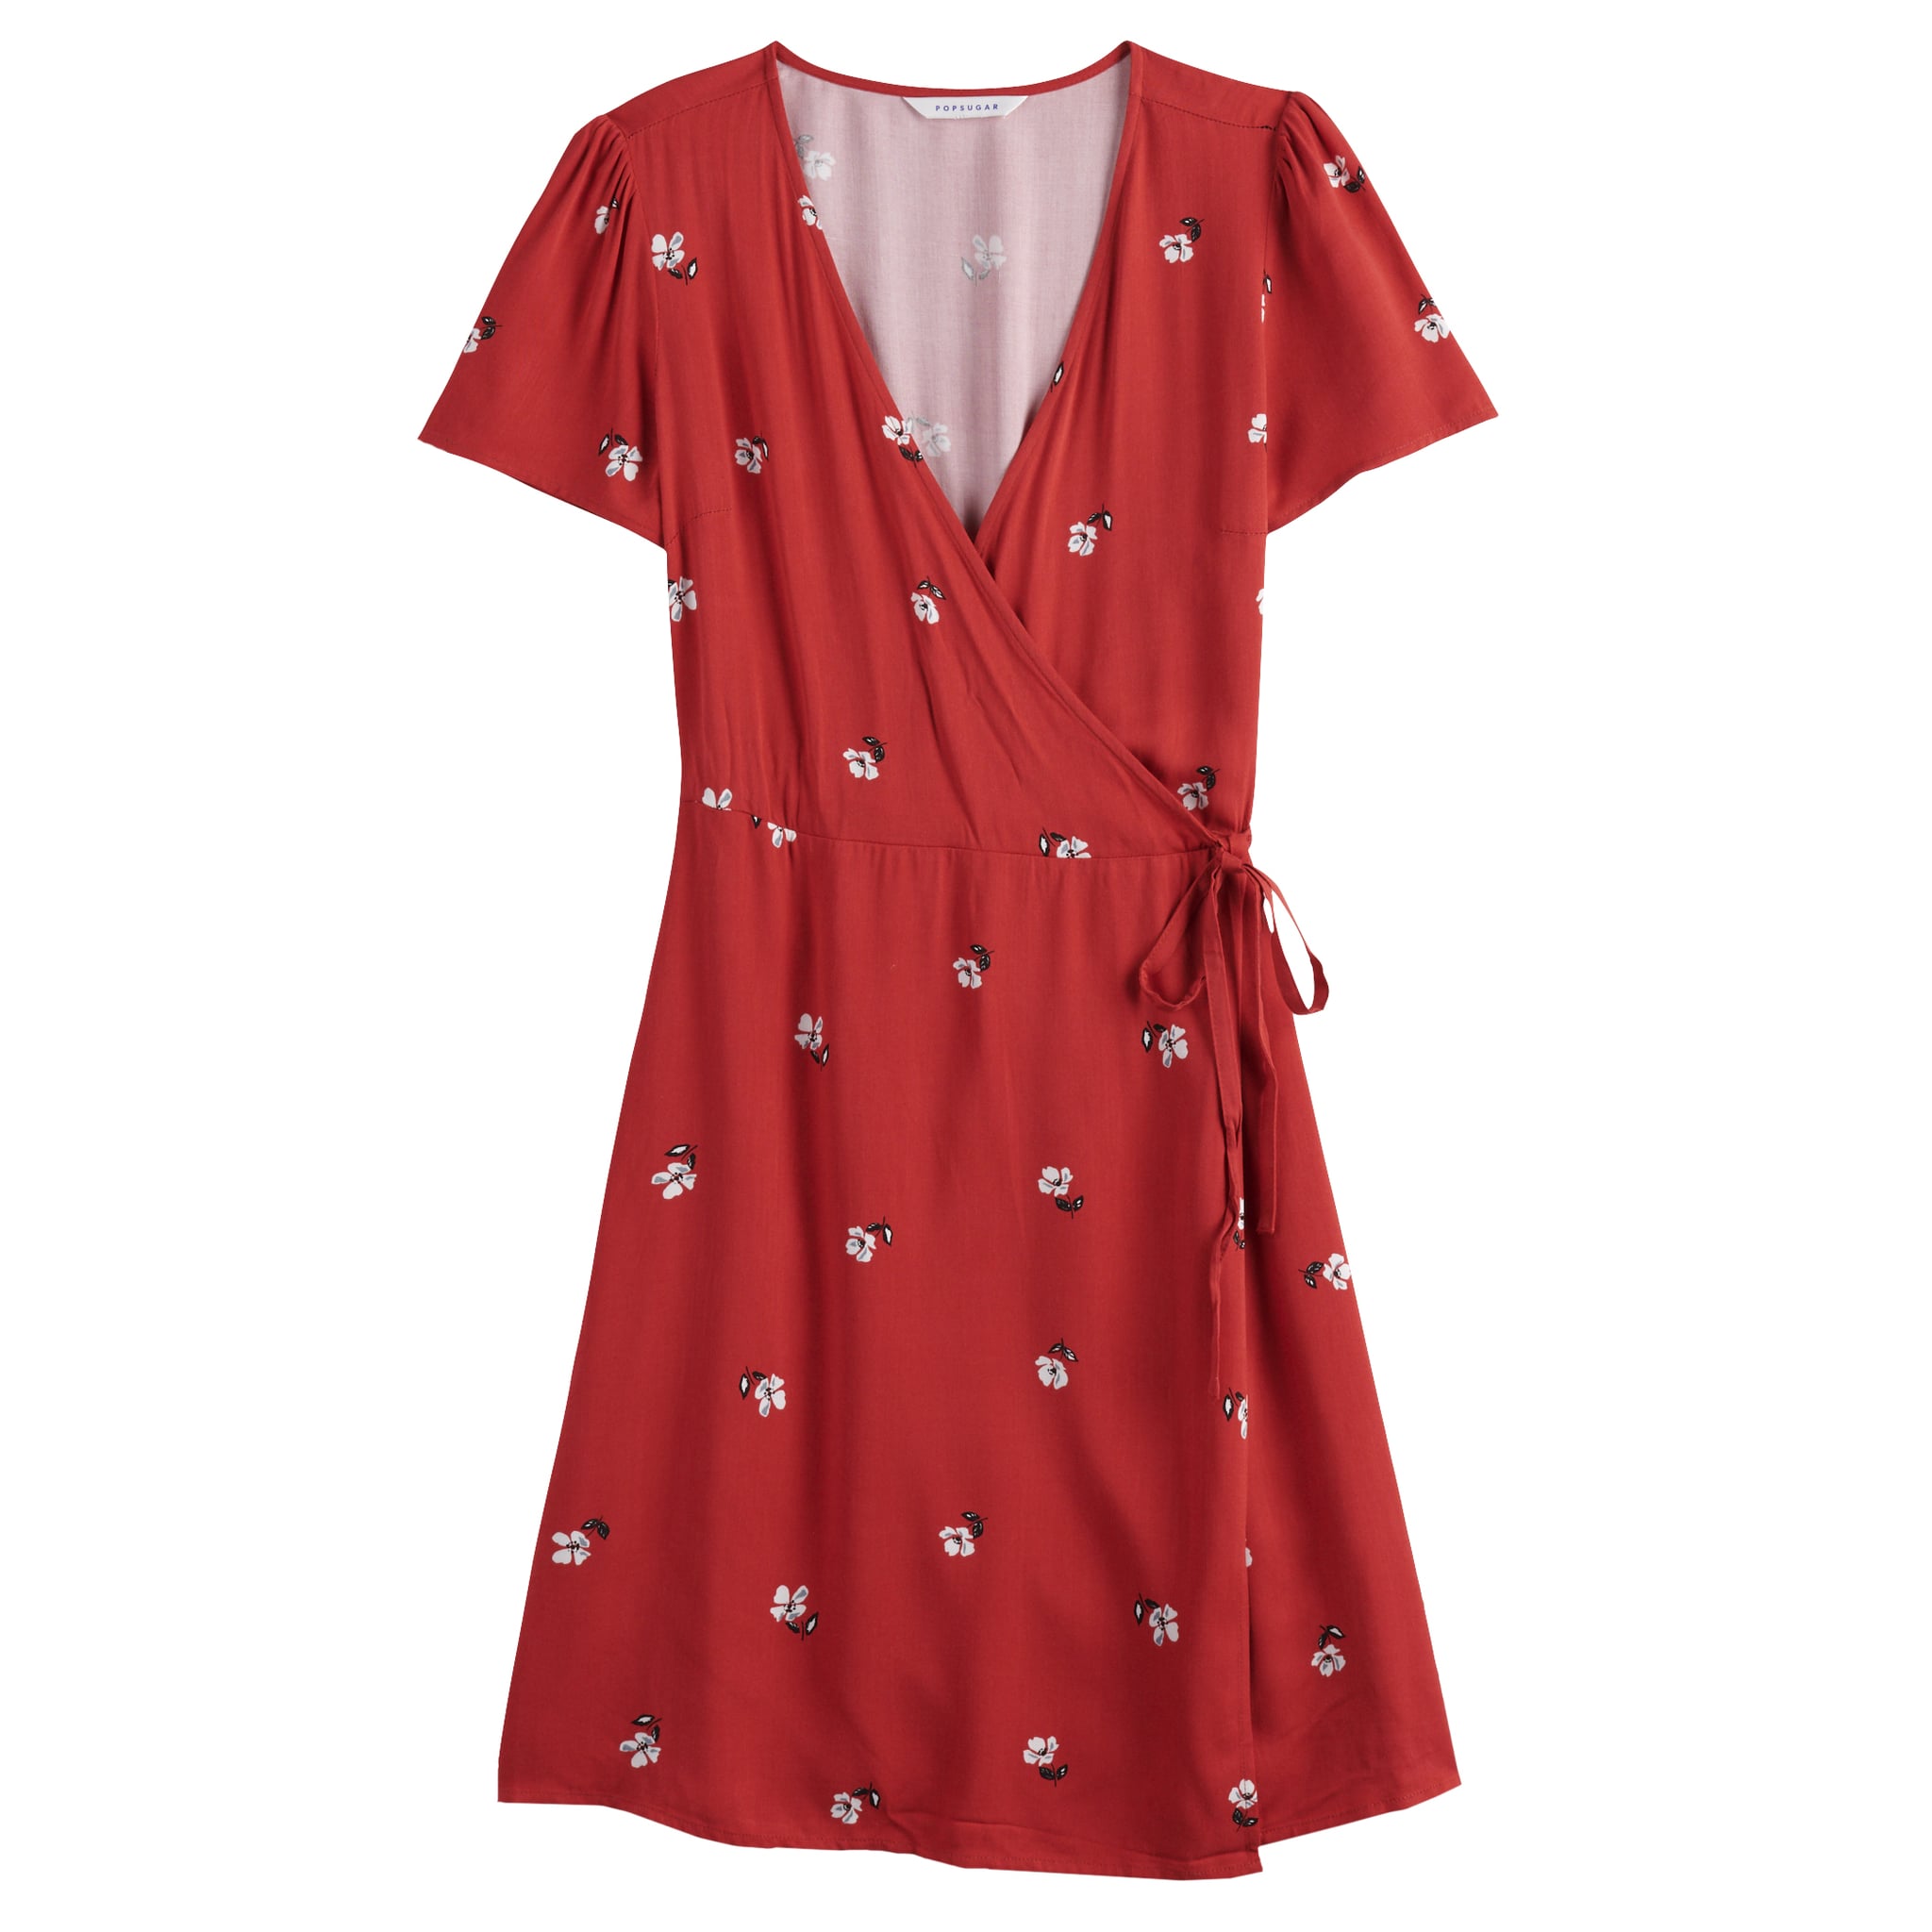 Cheap Dresses From POPSUGAR at Kohl's ...